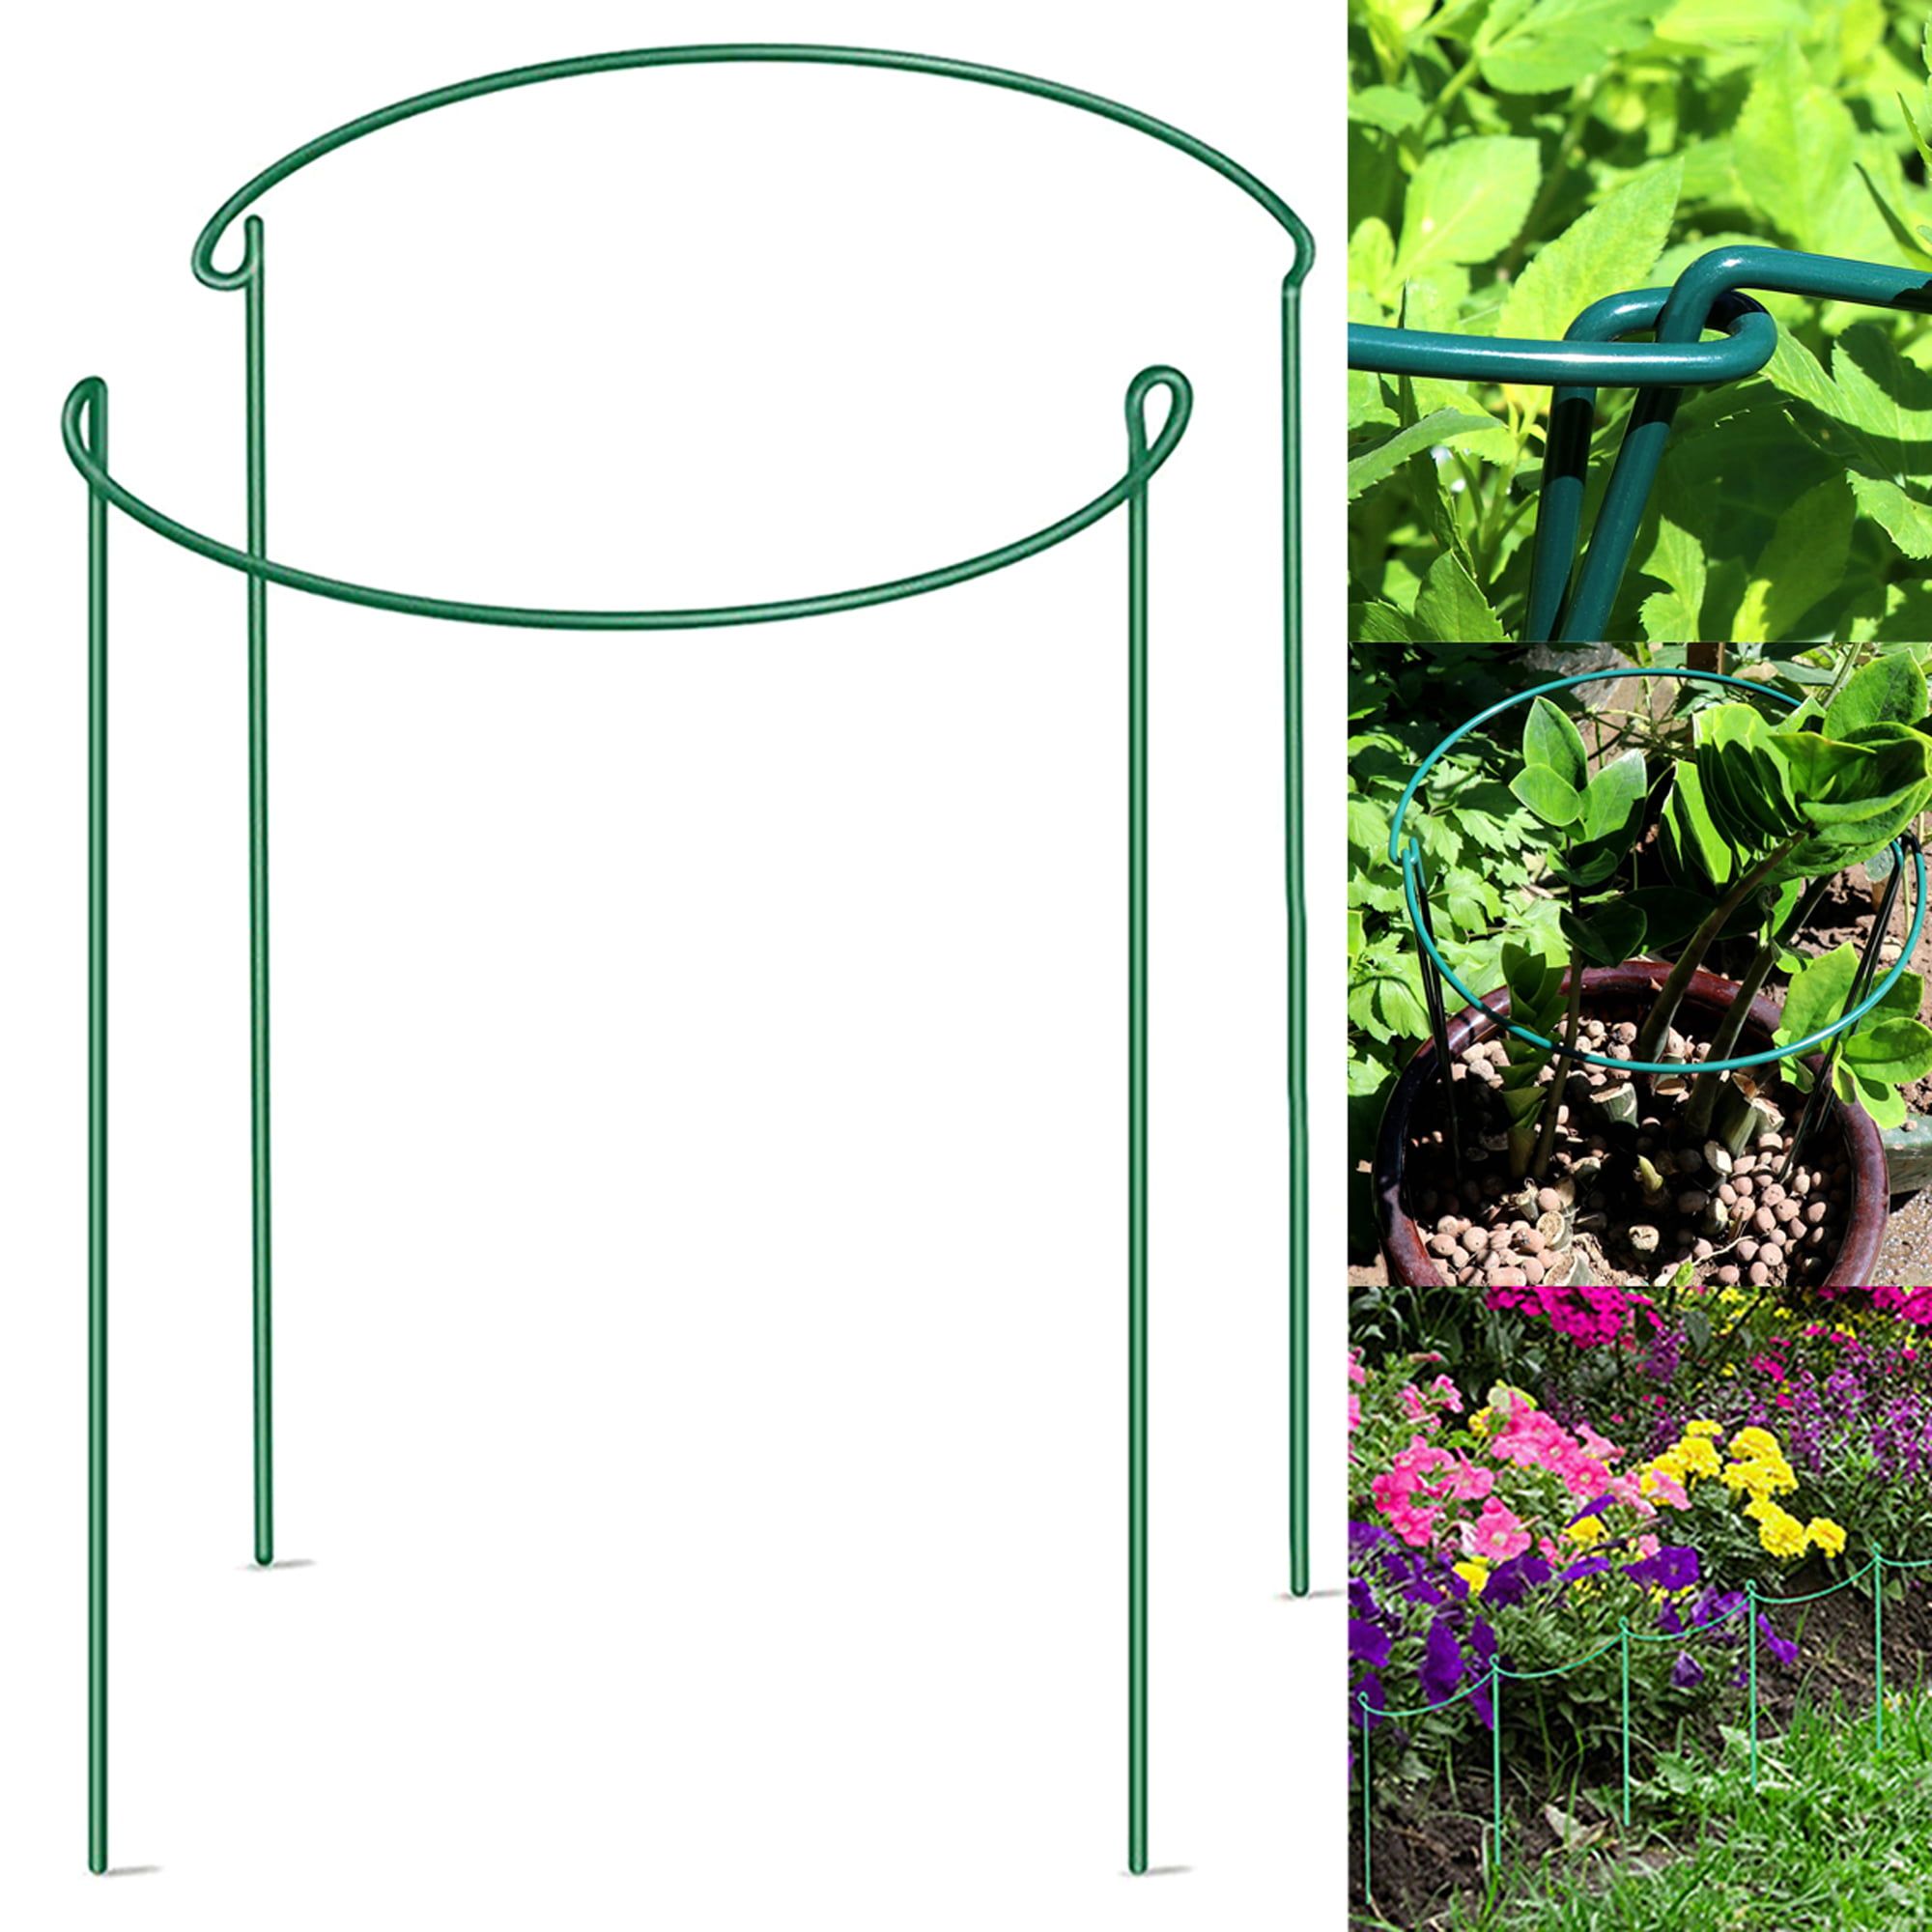 Green Half Round Plant Support Rings for Potted Plants 9.4 Wide x 15.6 High Metal Garden Plant Stake Plant Cage for Tomato Hydrangea FEED GARDEN 2 Pack Plant Support Stakes 